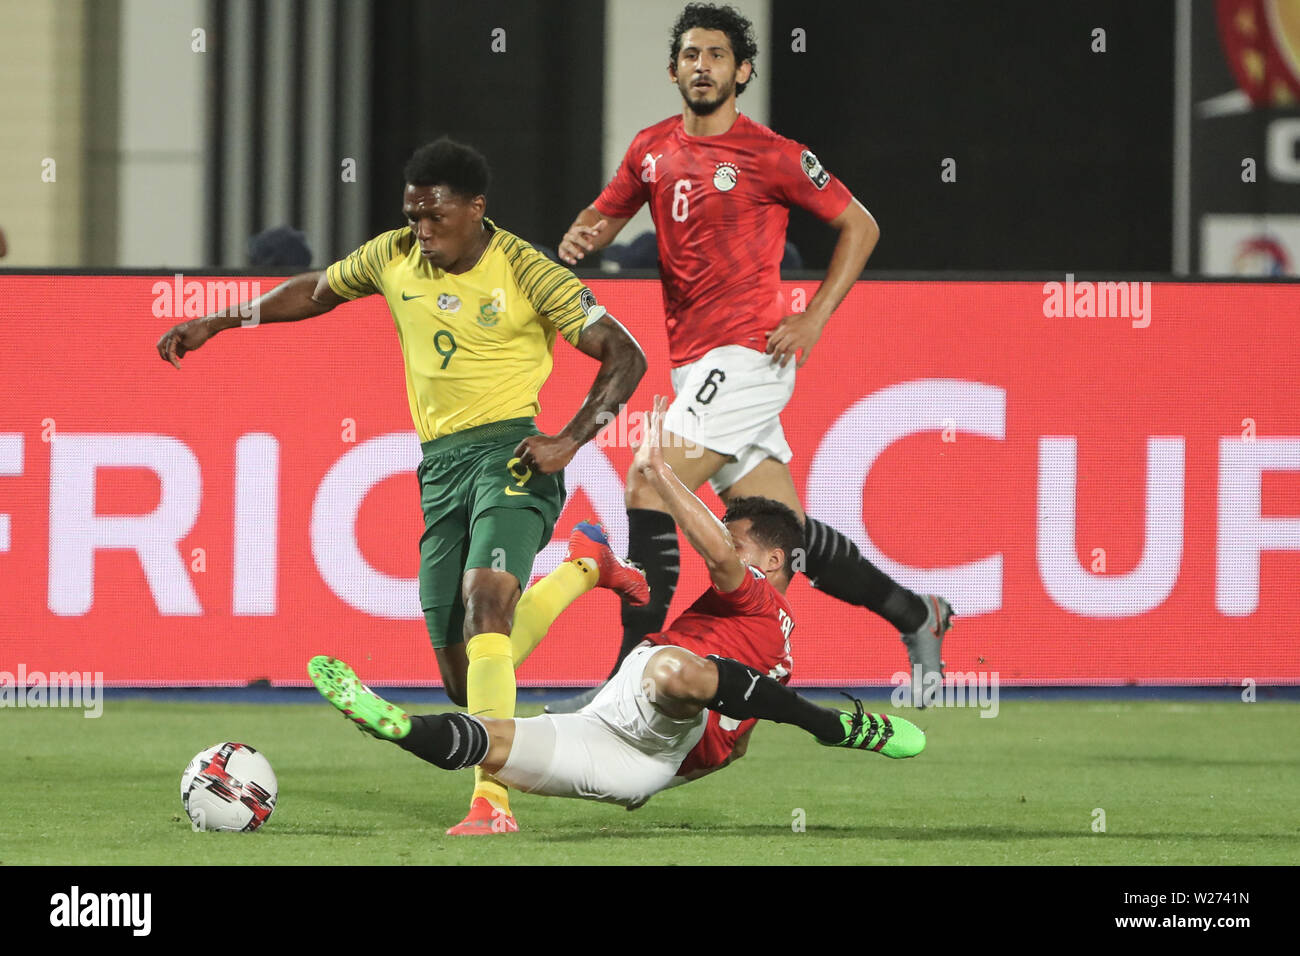 Cairo, Egypt. 06th July, 2019. South Africa's Lebo Mothiba (L) in action against Egypt's Ahmed Hegazy and Tarek Hamed during the 2019 Africa Cup of Nations round of 16 soccer match between Egypt and South Africa at Cairo International Stadium. Credit: Omar Zoheiry/dpa/Alamy Live News Stock Photo